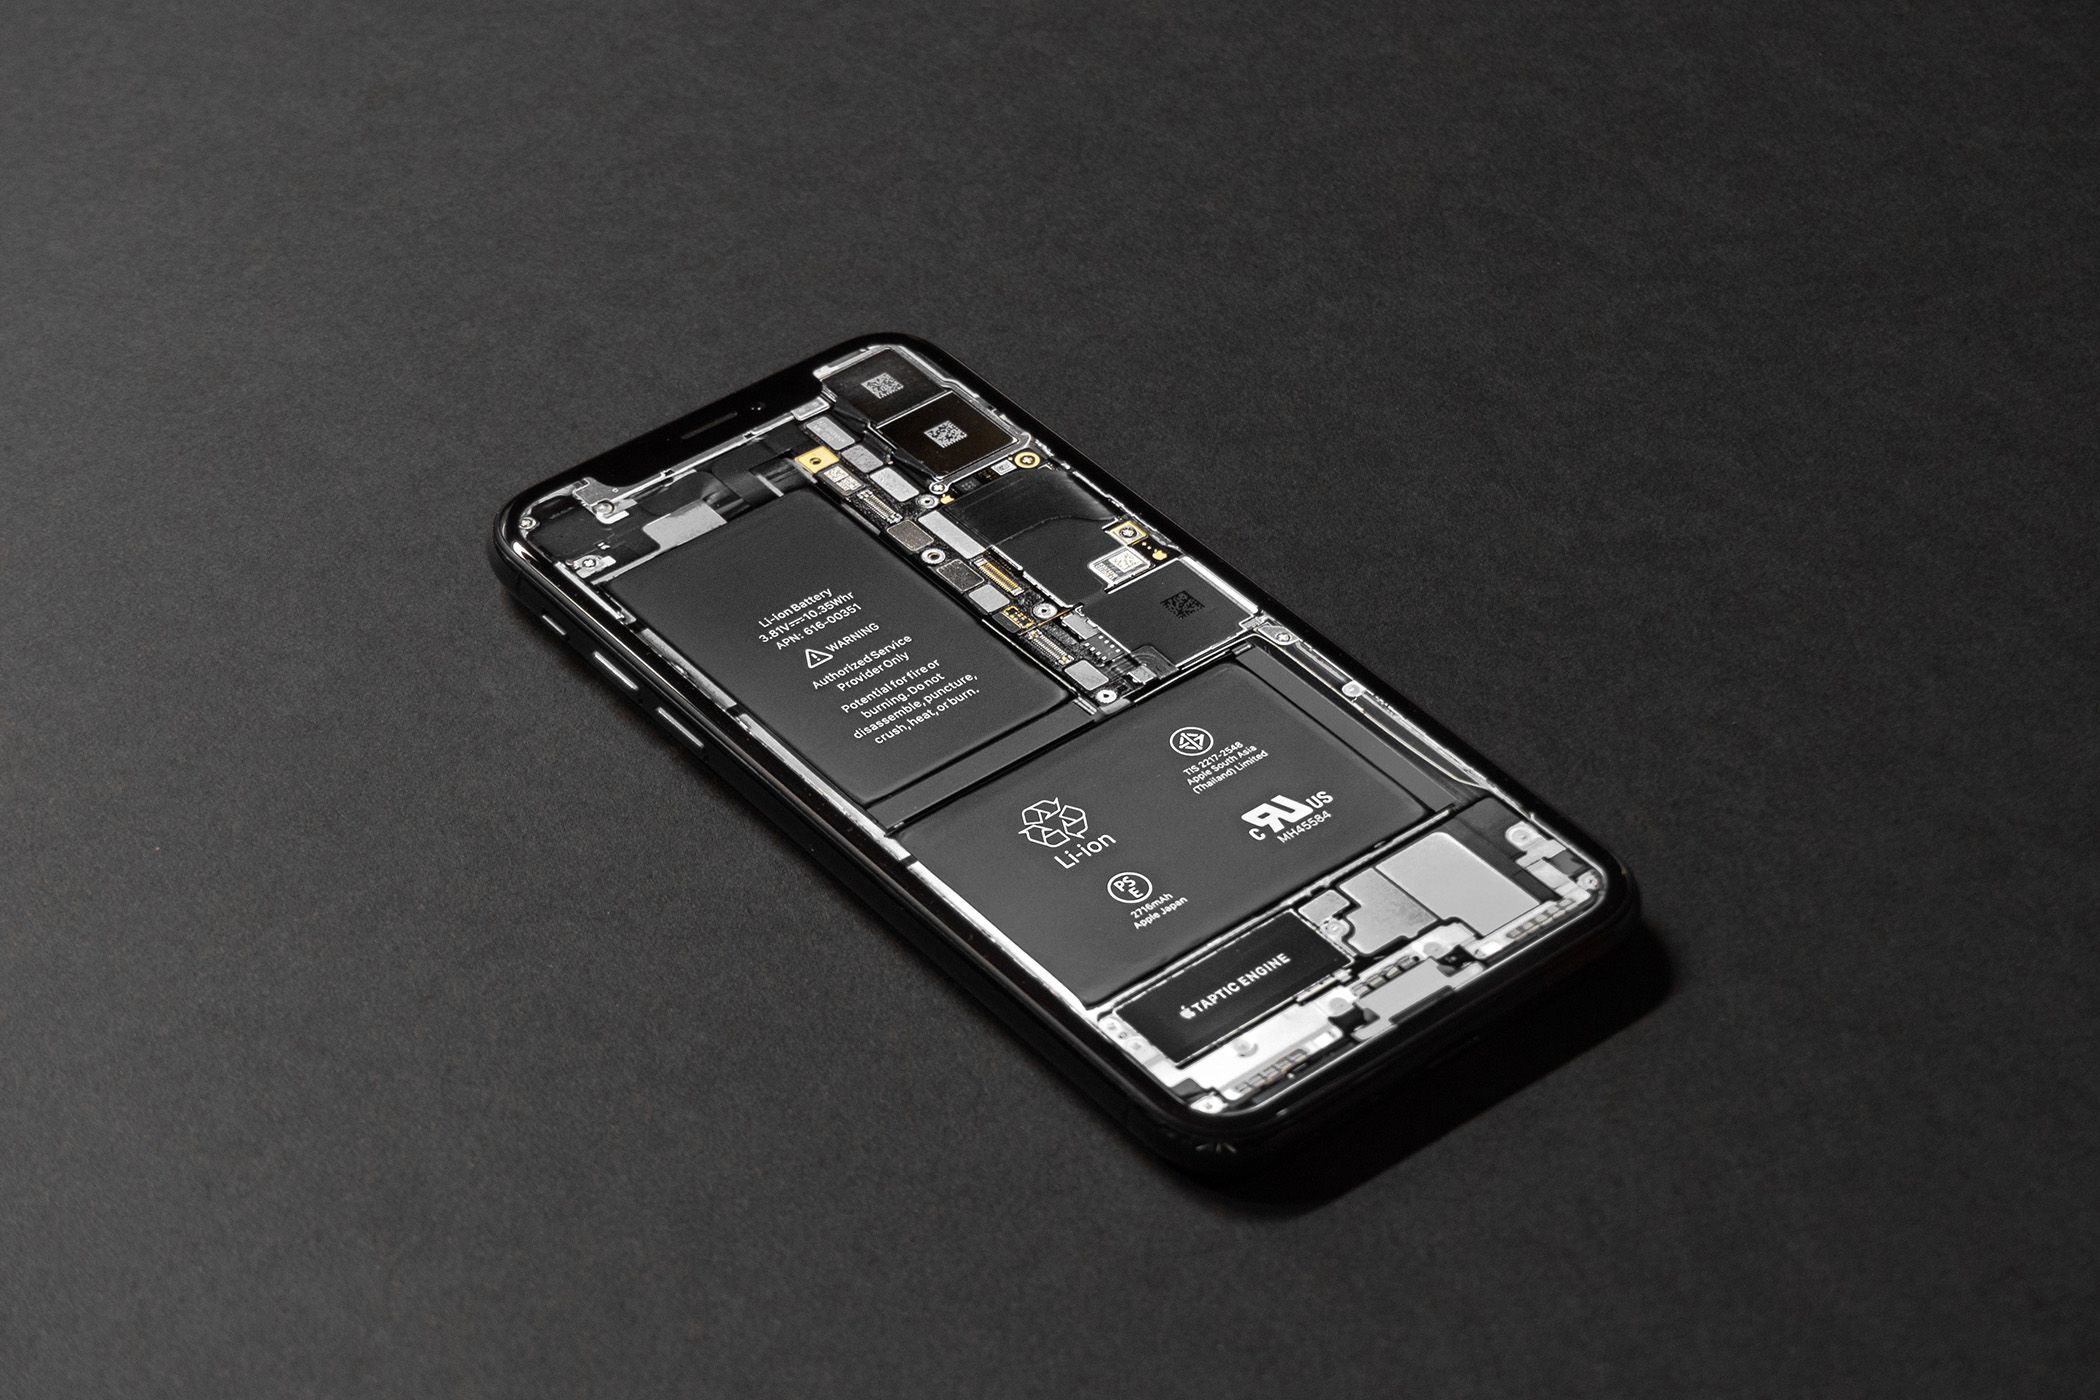 iPhone without screen showing the internal hardware on a black surface.